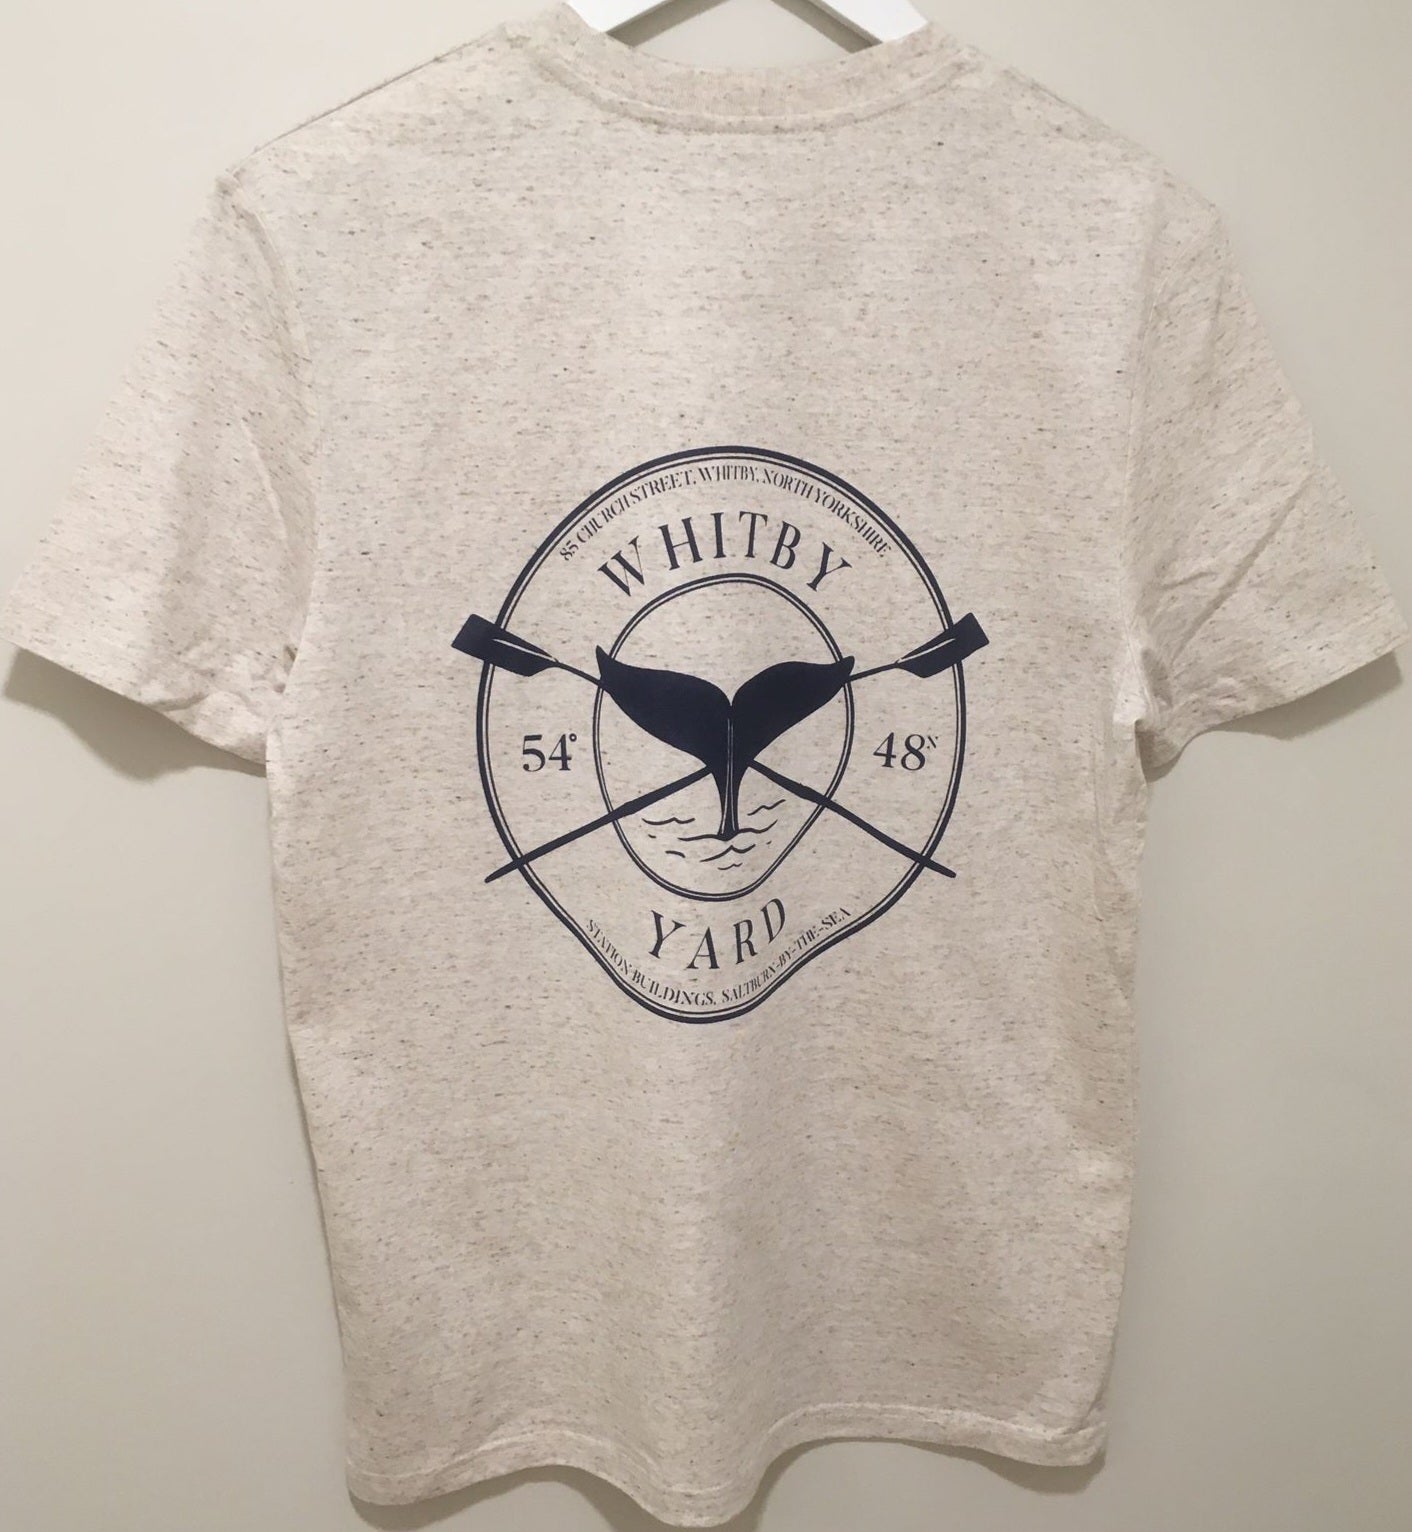 Unisex ‘Rowing Whale’ design T shirt in Oatmeal